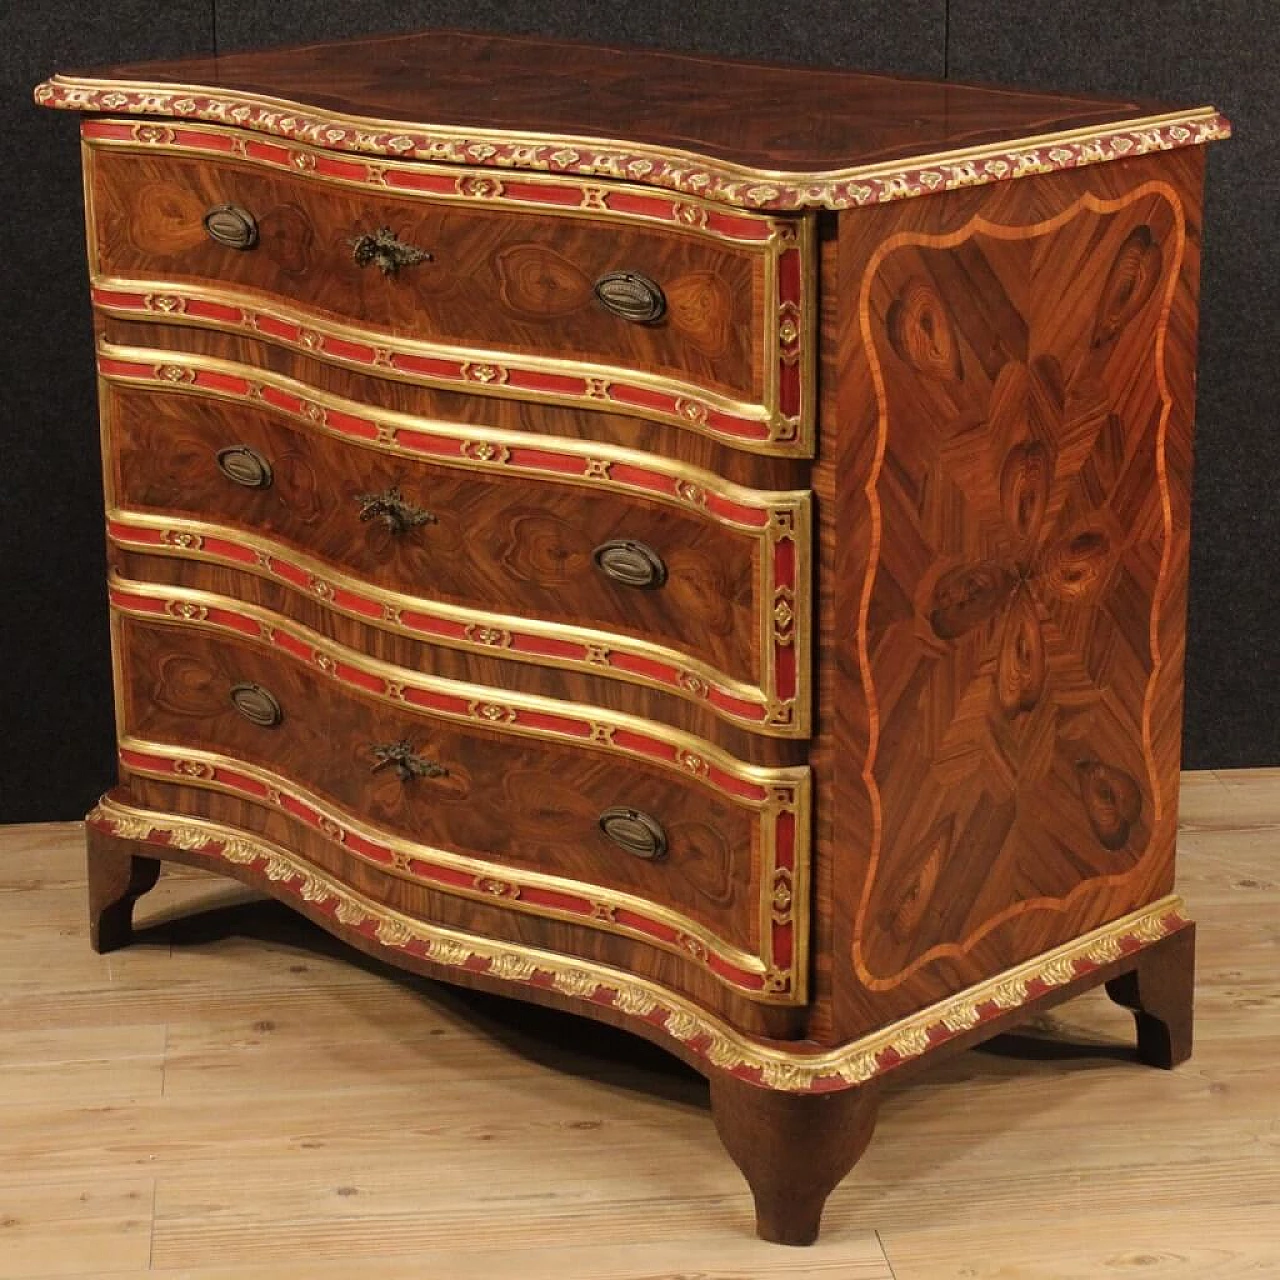 Genoese inlaid, lacquered and gilded wood dresser 9